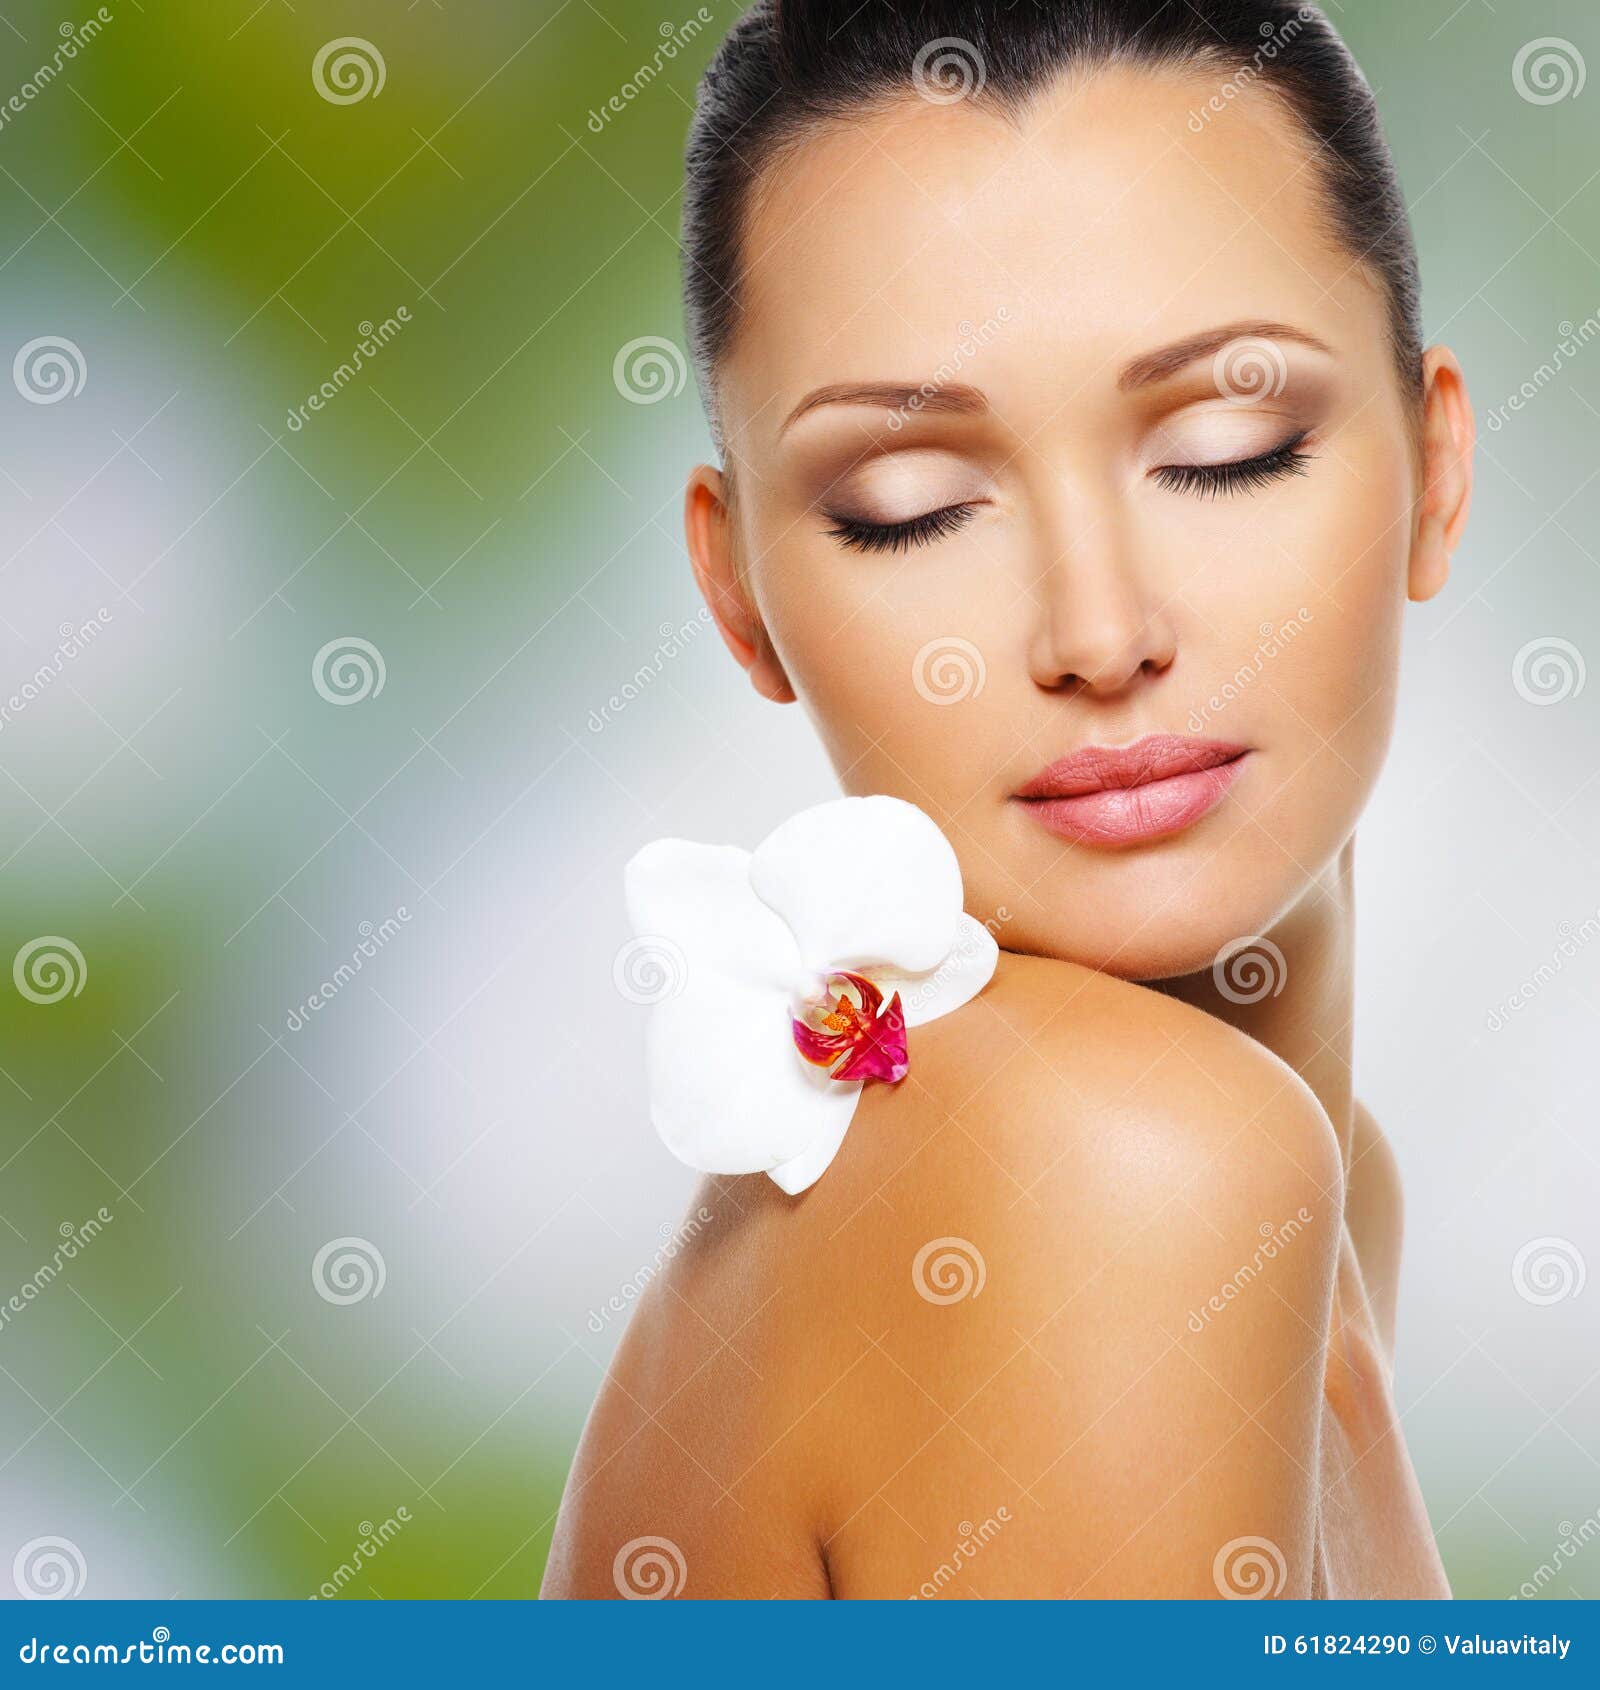 Face of beautiful woman with a <b>white orchid</b> flower - face-beautiful-woman-white-orchid-flower-beauty-skin-care-treatment-green-nature-background-61824290